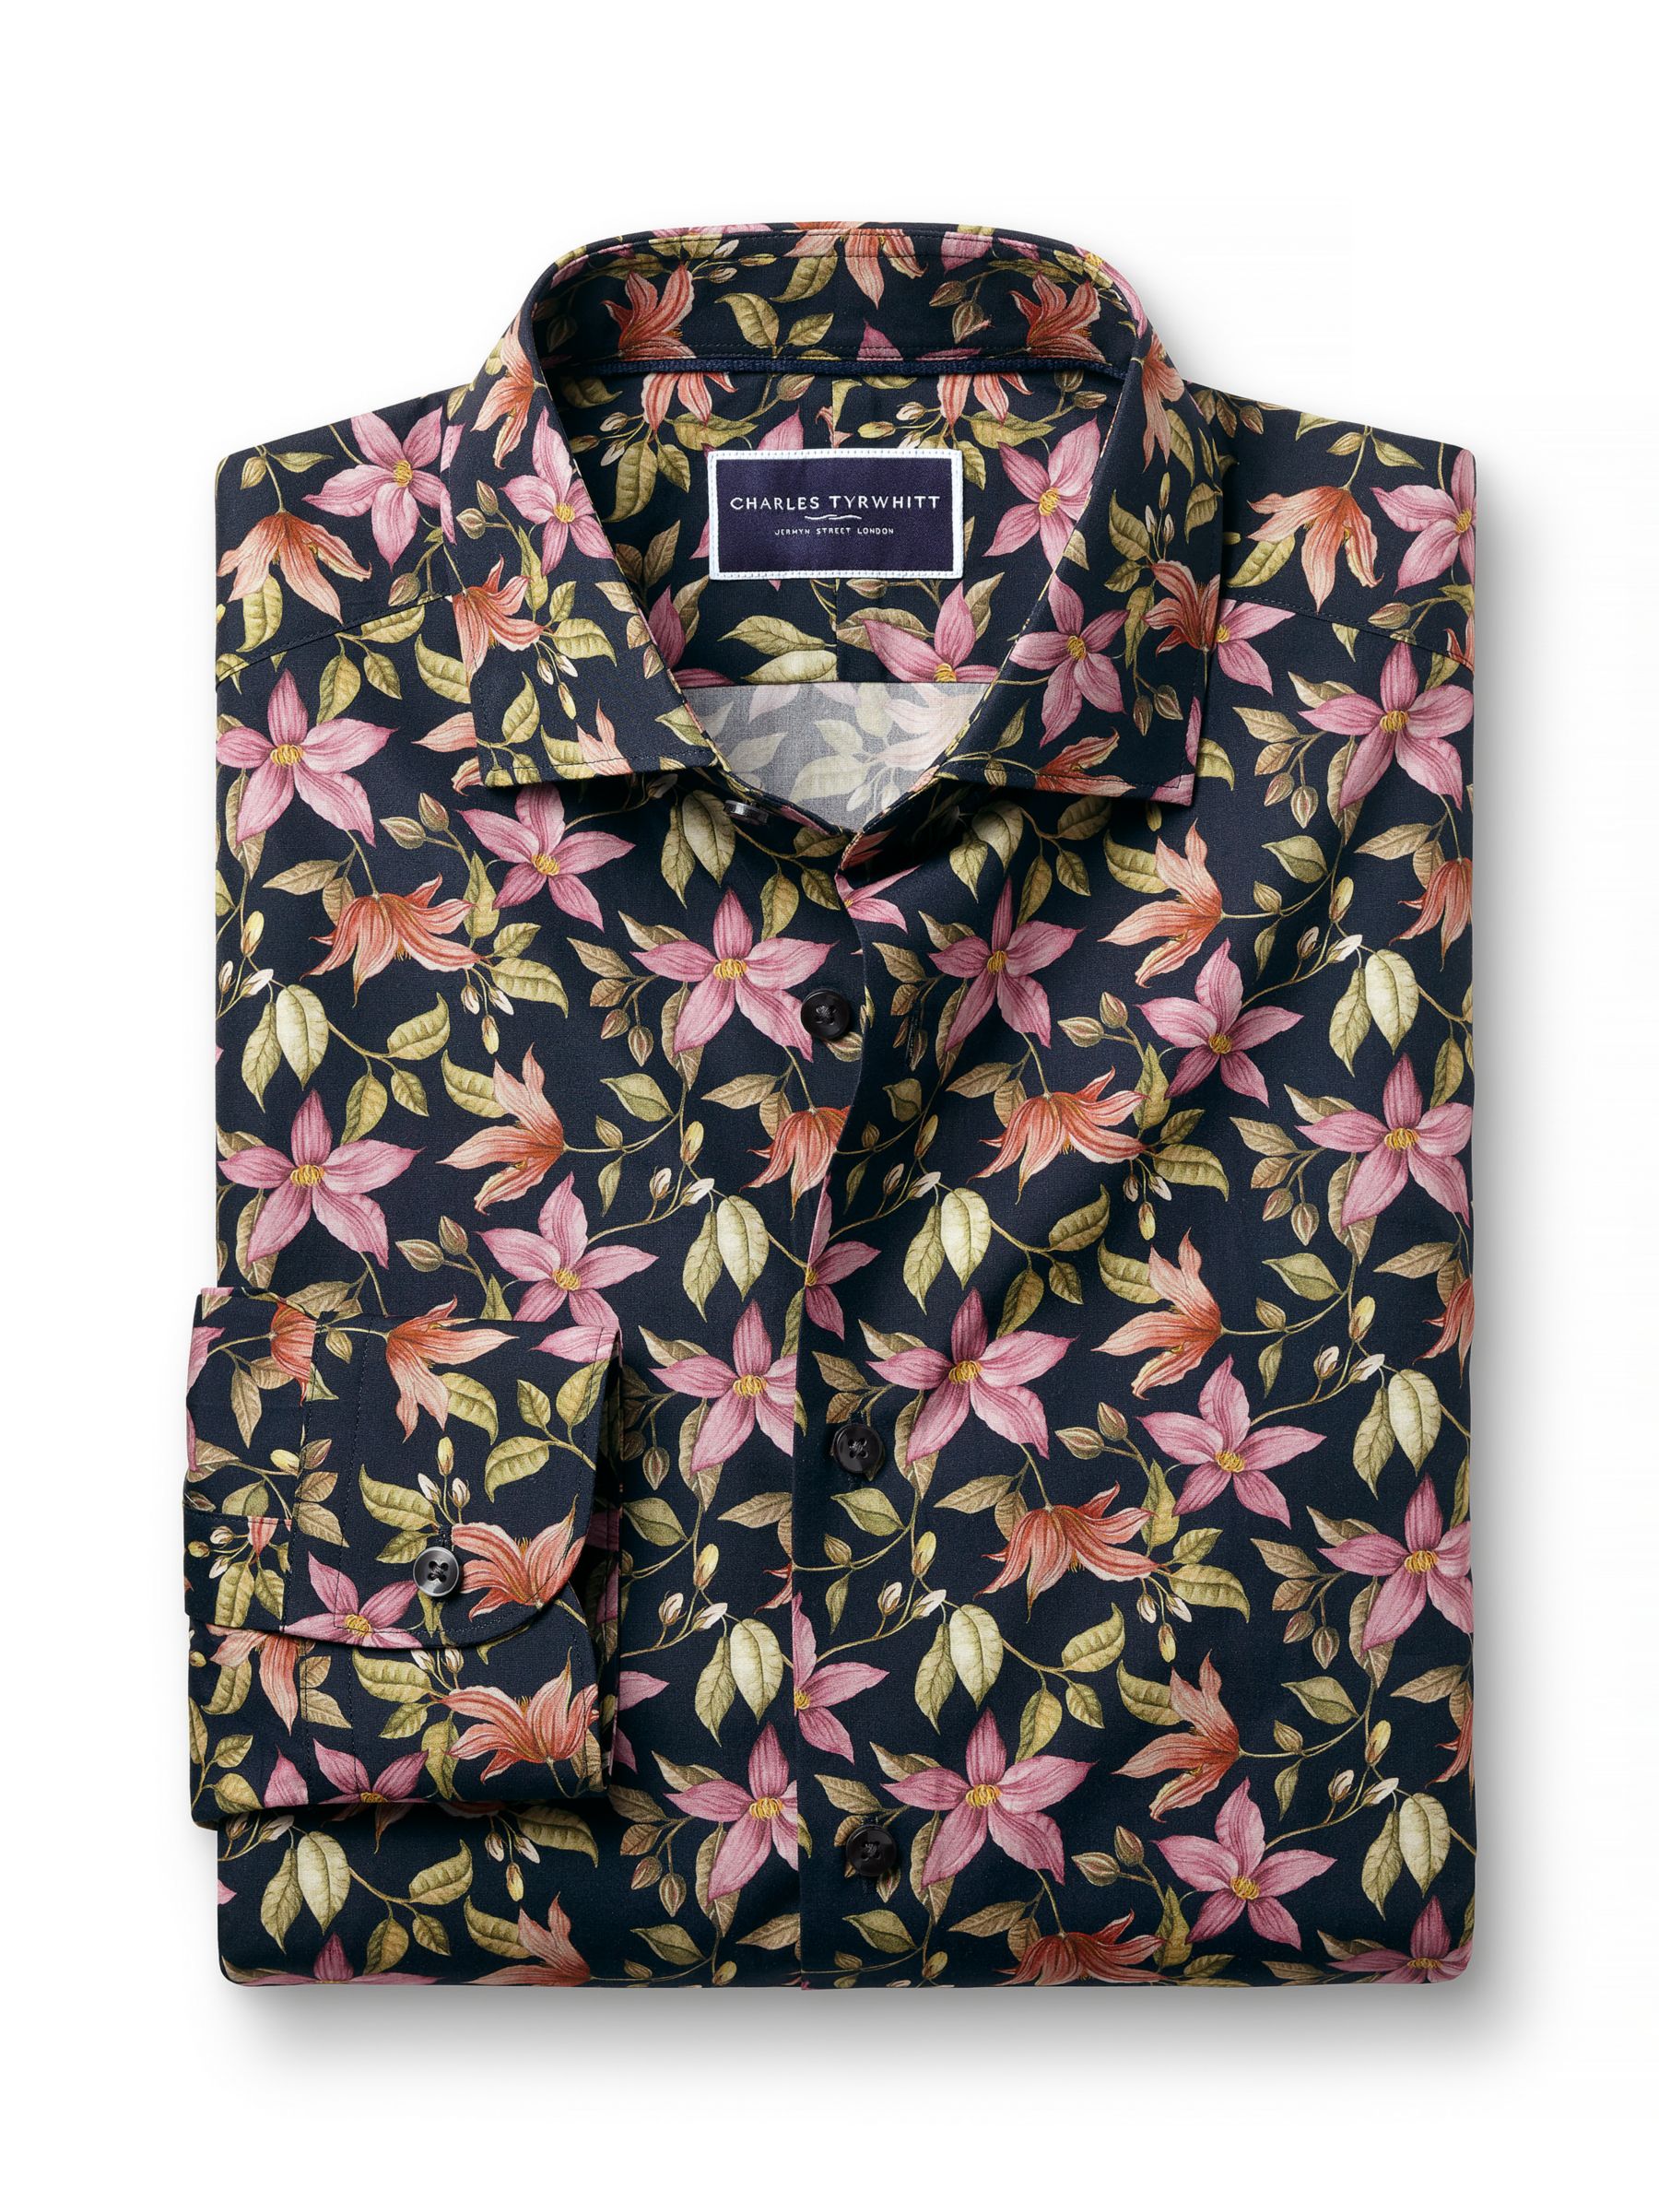 Buy Charles Tyrwhitt Classic Fit Large Floral Liberty Print Shirt, Navy/Multi Online at johnlewis.com